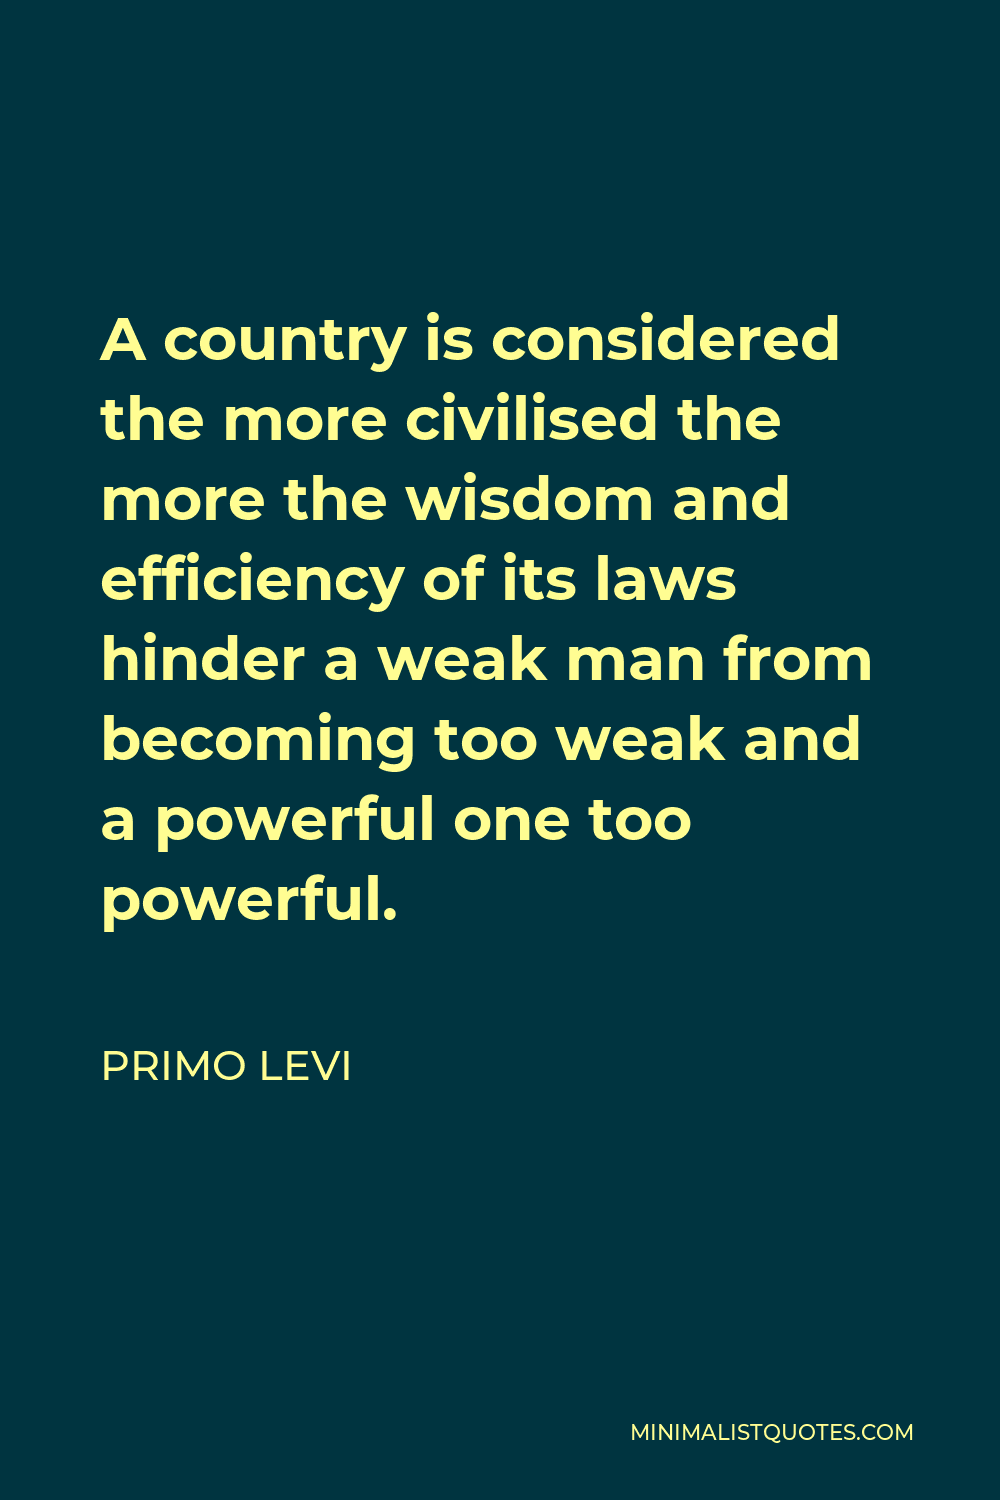 Primo Levi Quote - A country is considered the more civilised the more the wisdom and efficiency of its laws hinder a weak man from becoming too weak and a powerful one too powerful.